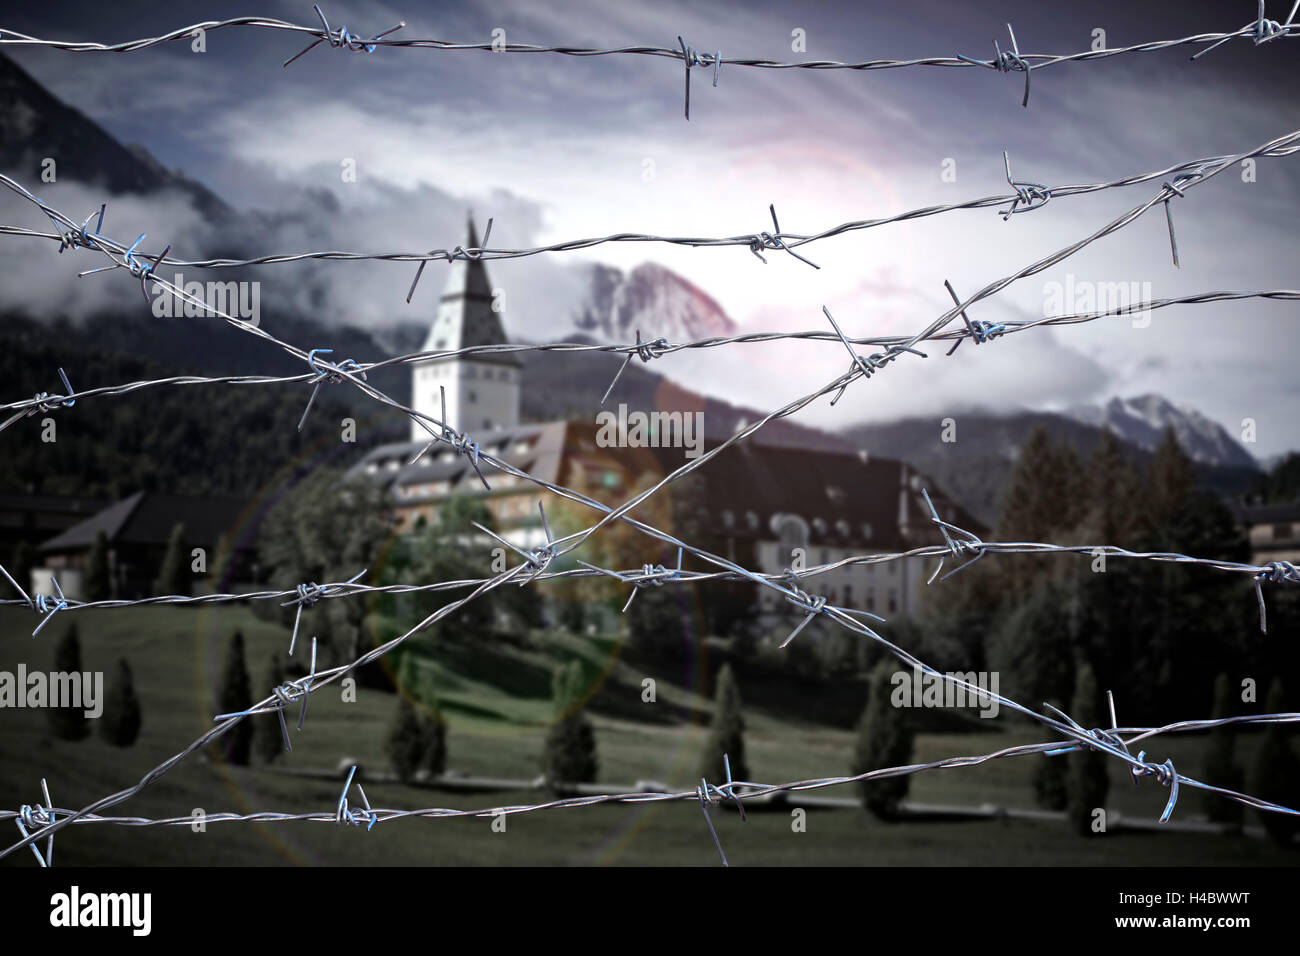 Schloss Elmau outside, G7 summit, barbed wire Stock Photo